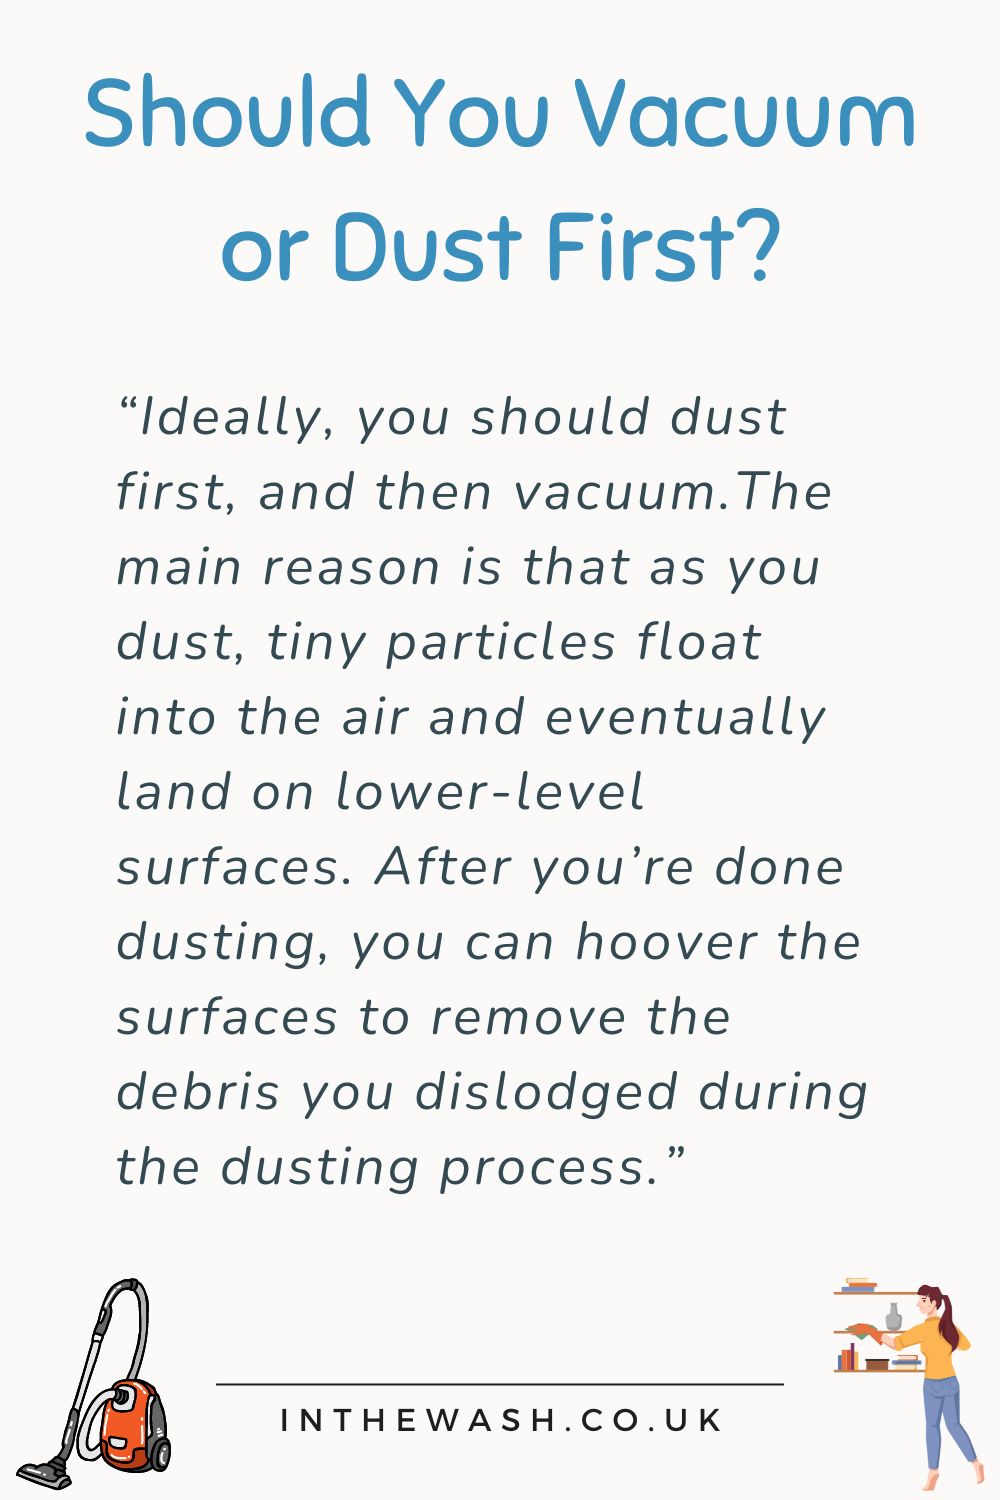 Should you vacuum or dust first?